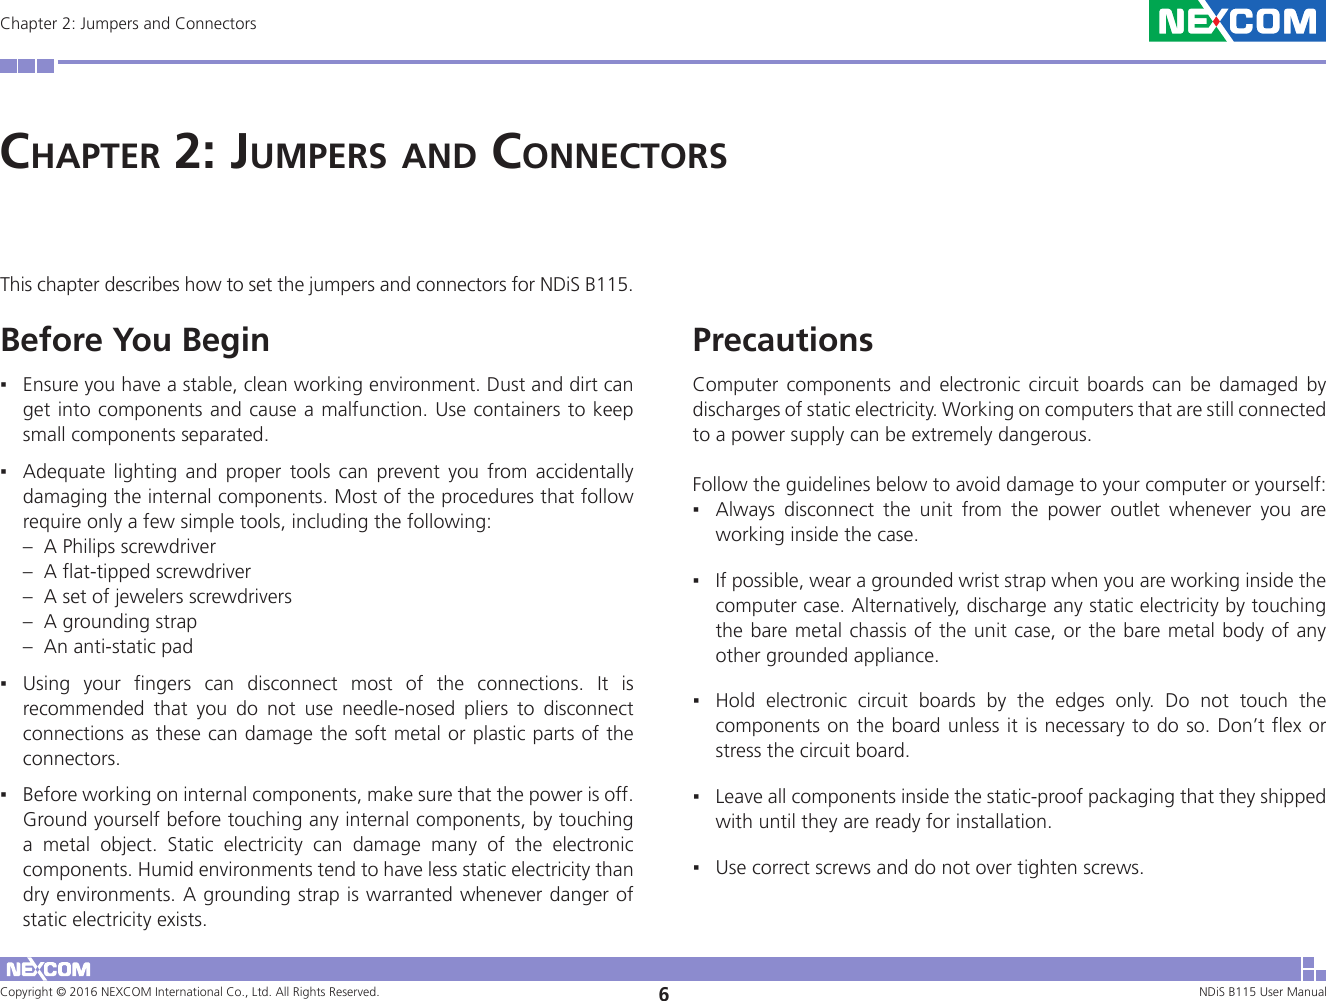 Copyright © 2016 NEXCOM International Co., Ltd. All Rights Reserved. 6NDiS B115 User Manual Chapter 2: Jumpers and ConnectorsChaPter 2: JumPers and ConneCtorsThis chapter describes how to set the jumpers and connectors for NDiS B115.  Before You Begin ▪Ensure you have a stable, clean working environment. Dust and dirt can get into components and cause a malfunction. Use containers to keep small components separated.  ▪Adequate lighting and proper tools can prevent you from accidentally damaging the internal components. Most of the procedures that follow require only a few simple tools, including the following: –  A Philips screwdriver –  A flat-tipped screwdriver –  A set of jewelers screwdrivers –  A grounding strap –  An anti-static pad  ▪Using your fingers can disconnect most of the connections. It is recommended that you do not use needle-nosed pliers to disconnect connections as these can damage the soft metal or plastic parts of the connectors. ▪Before working on internal components, make sure that the power is off. Ground yourself before touching any internal components, by touching a metal object. Static electricity can damage many of the electronic components. Humid environments tend to have less static electricity than dry environments. A grounding strap is warranted whenever danger of static electricity exists.Precautions Computer components and electronic circuit boards can be damaged by discharges of static electricity. Working on computers that are still connected to a power supply can be extremely dangerous. Follow the guidelines below to avoid damage to your computer or yourself:  ▪Always disconnect the unit from the power outlet whenever you are working inside the case.  ▪If possible, wear a grounded wrist strap when you are working inside the computer case. Alternatively, discharge any static electricity by touching the bare metal chassis of the unit case, or the bare metal body of any other grounded appliance.  ▪Hold electronic circuit boards by the edges only. Do not touch the components on the board unless it is necessary to do so. Don’t flex or stress the circuit board.  ▪Leave all components inside the static-proof packaging that they shipped with until they are ready for installation.  ▪Use correct screws and do not over tighten screws.